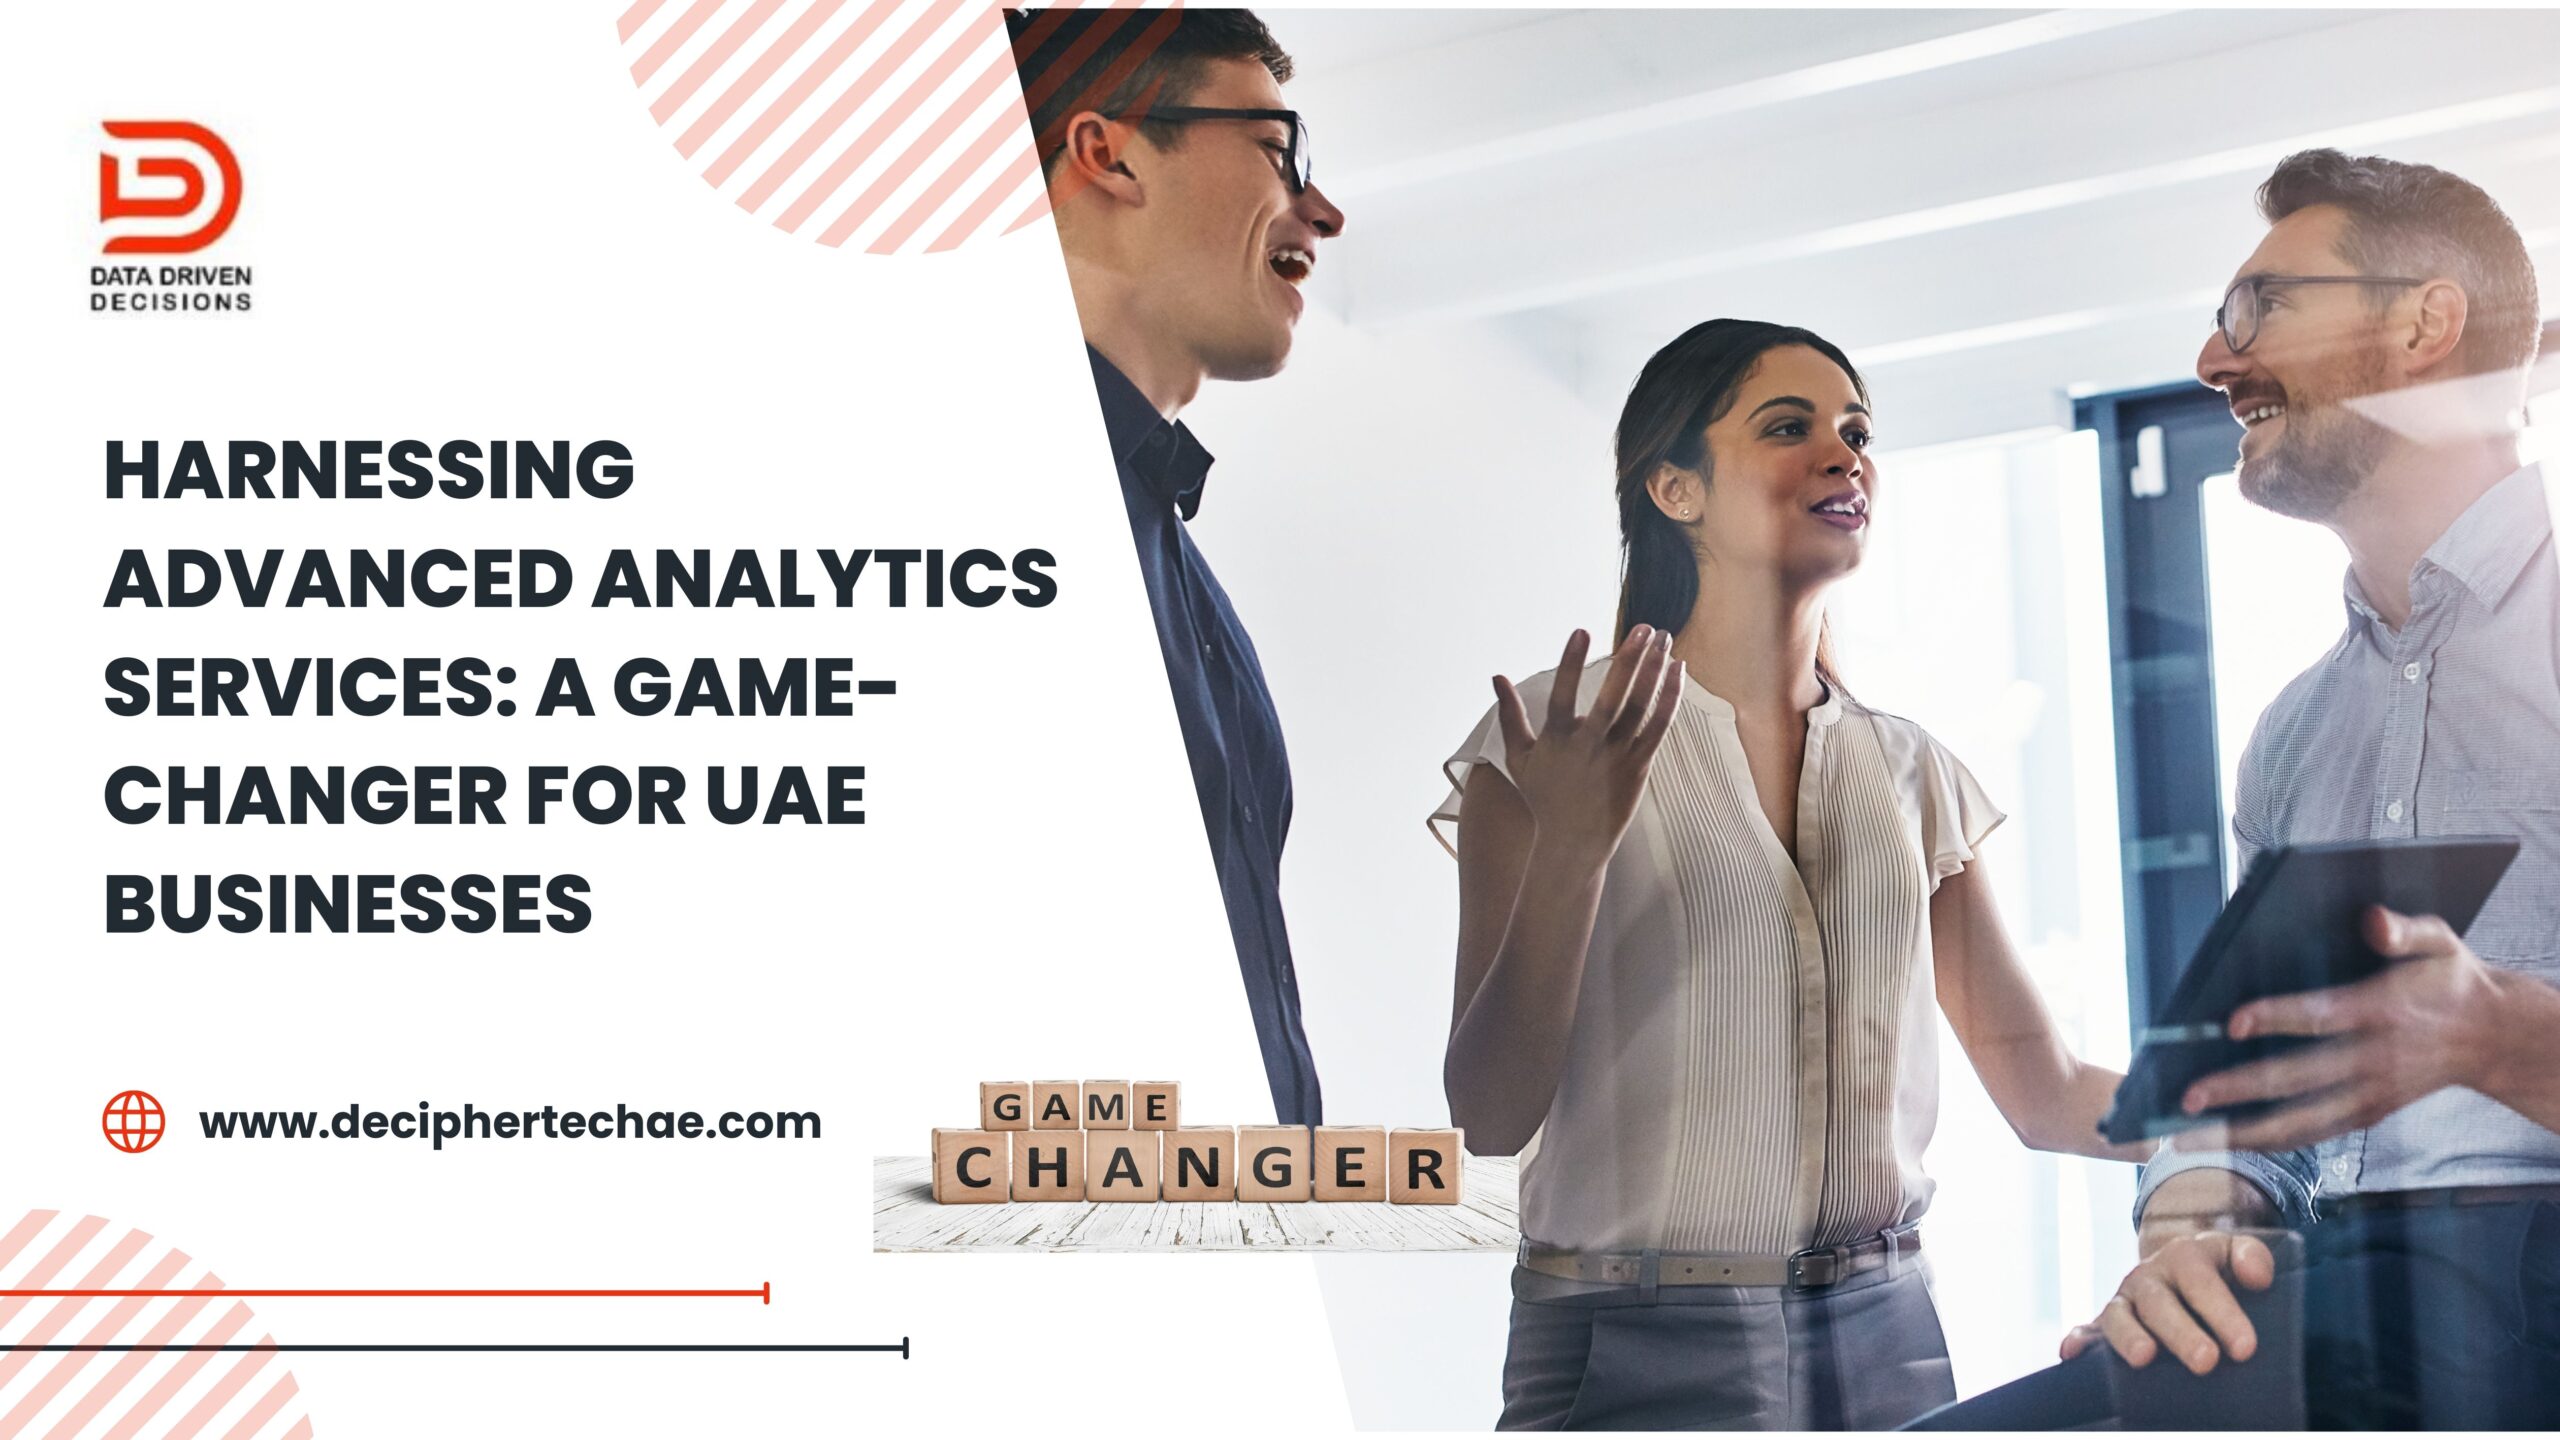 Harnessing Advanced Analytics Services: A Game-Changer for UAE Businesses